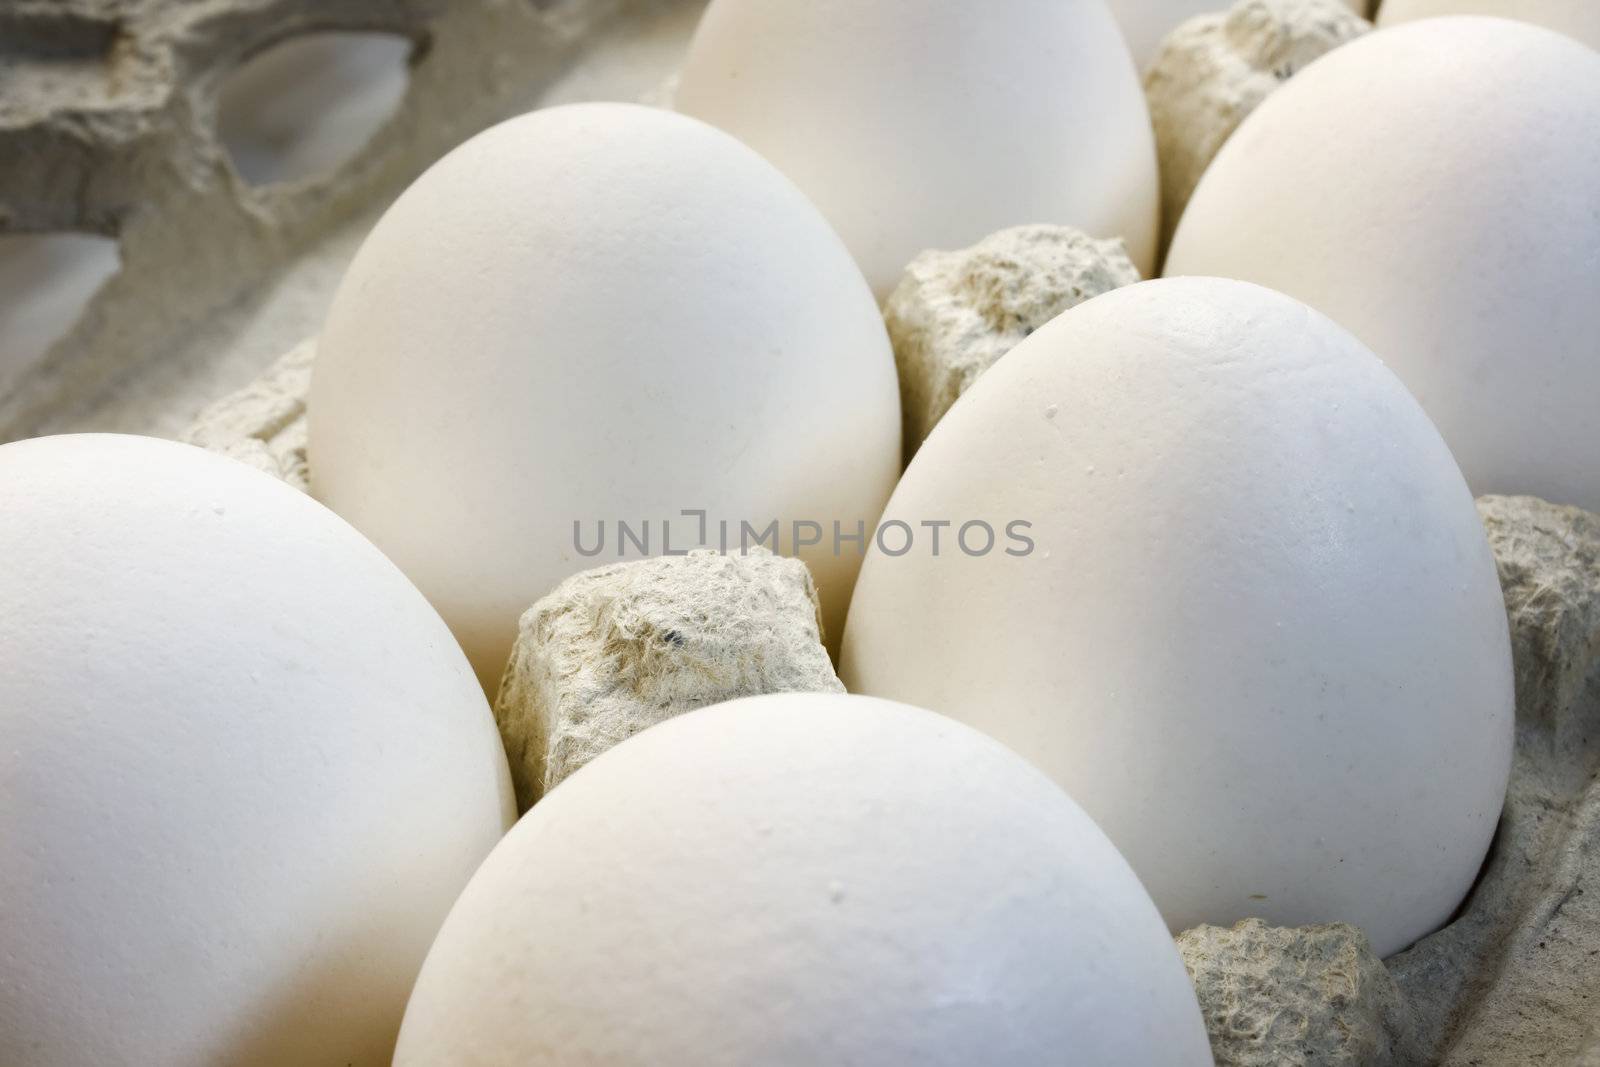 Eggs combined in cardboard packing, a photo close up